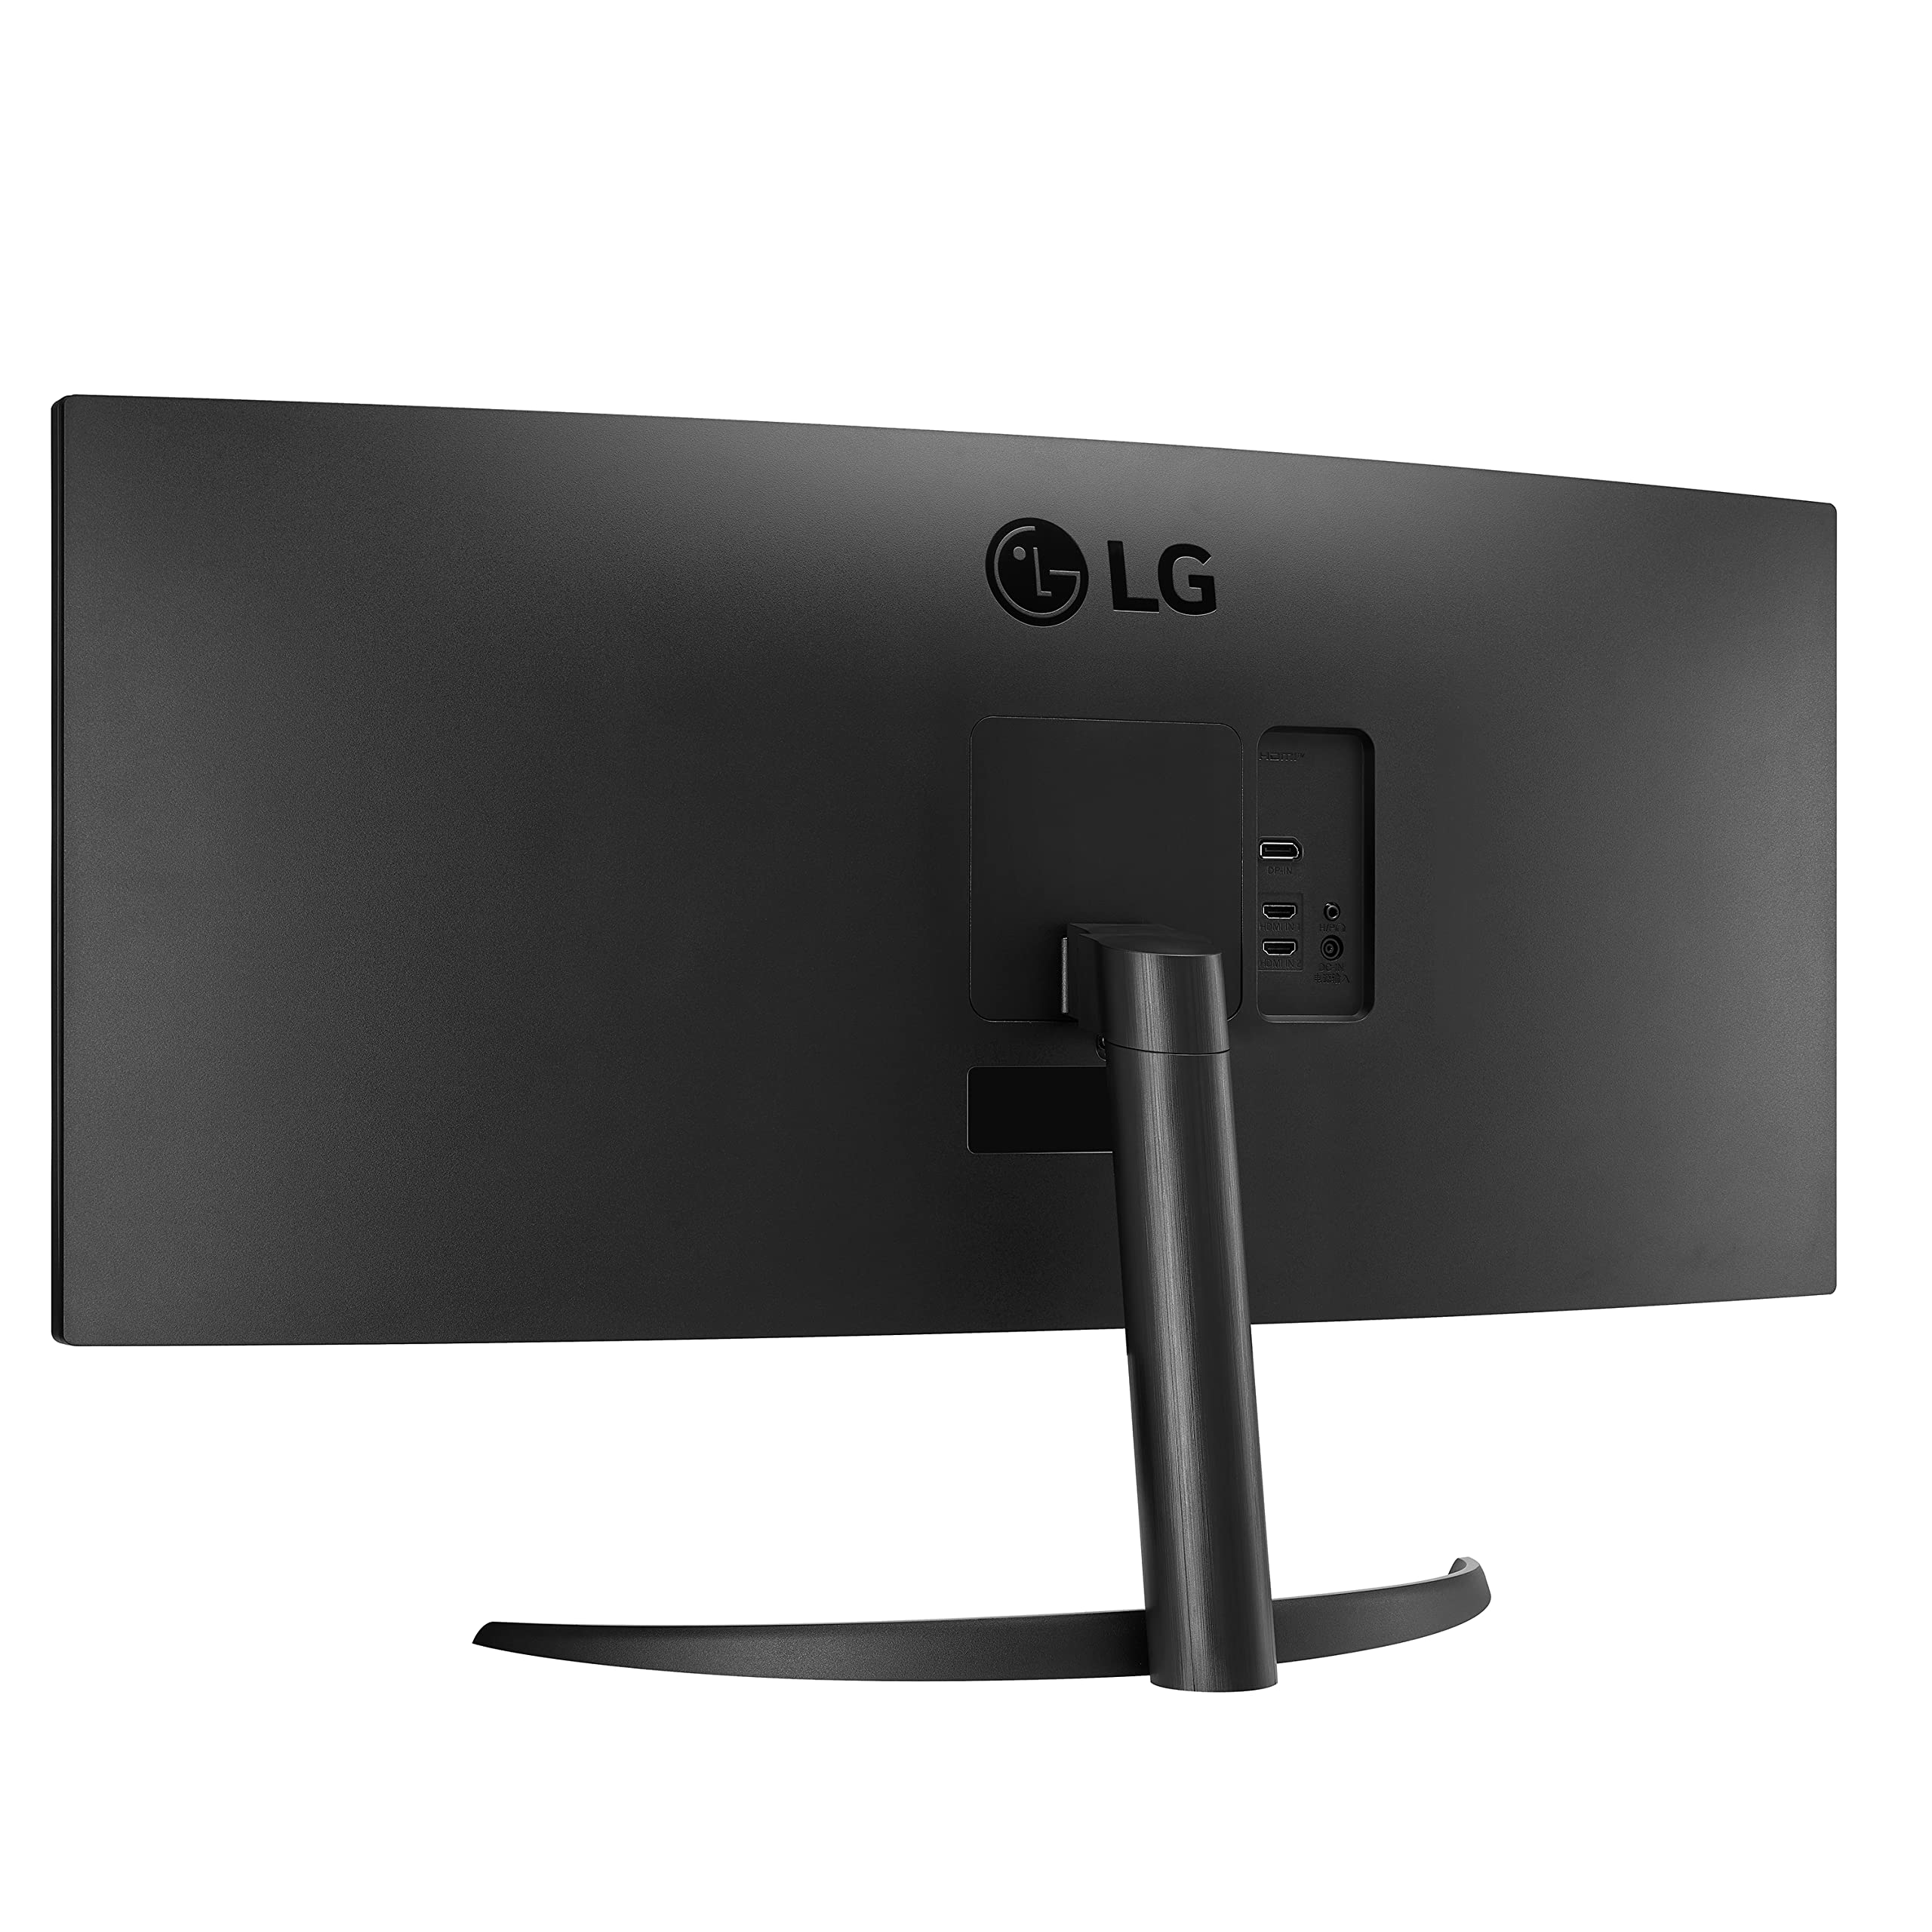 LG 34WP60C-B 34-Inch 21:9 Curved UltraWide QHD (3440x1440) VA Display with sRGB 99% Color Gamut and HDR 10, AMD FreeSync Premium and 3-Side Virtually Borderless Screen Curved QHD Tilt,Black